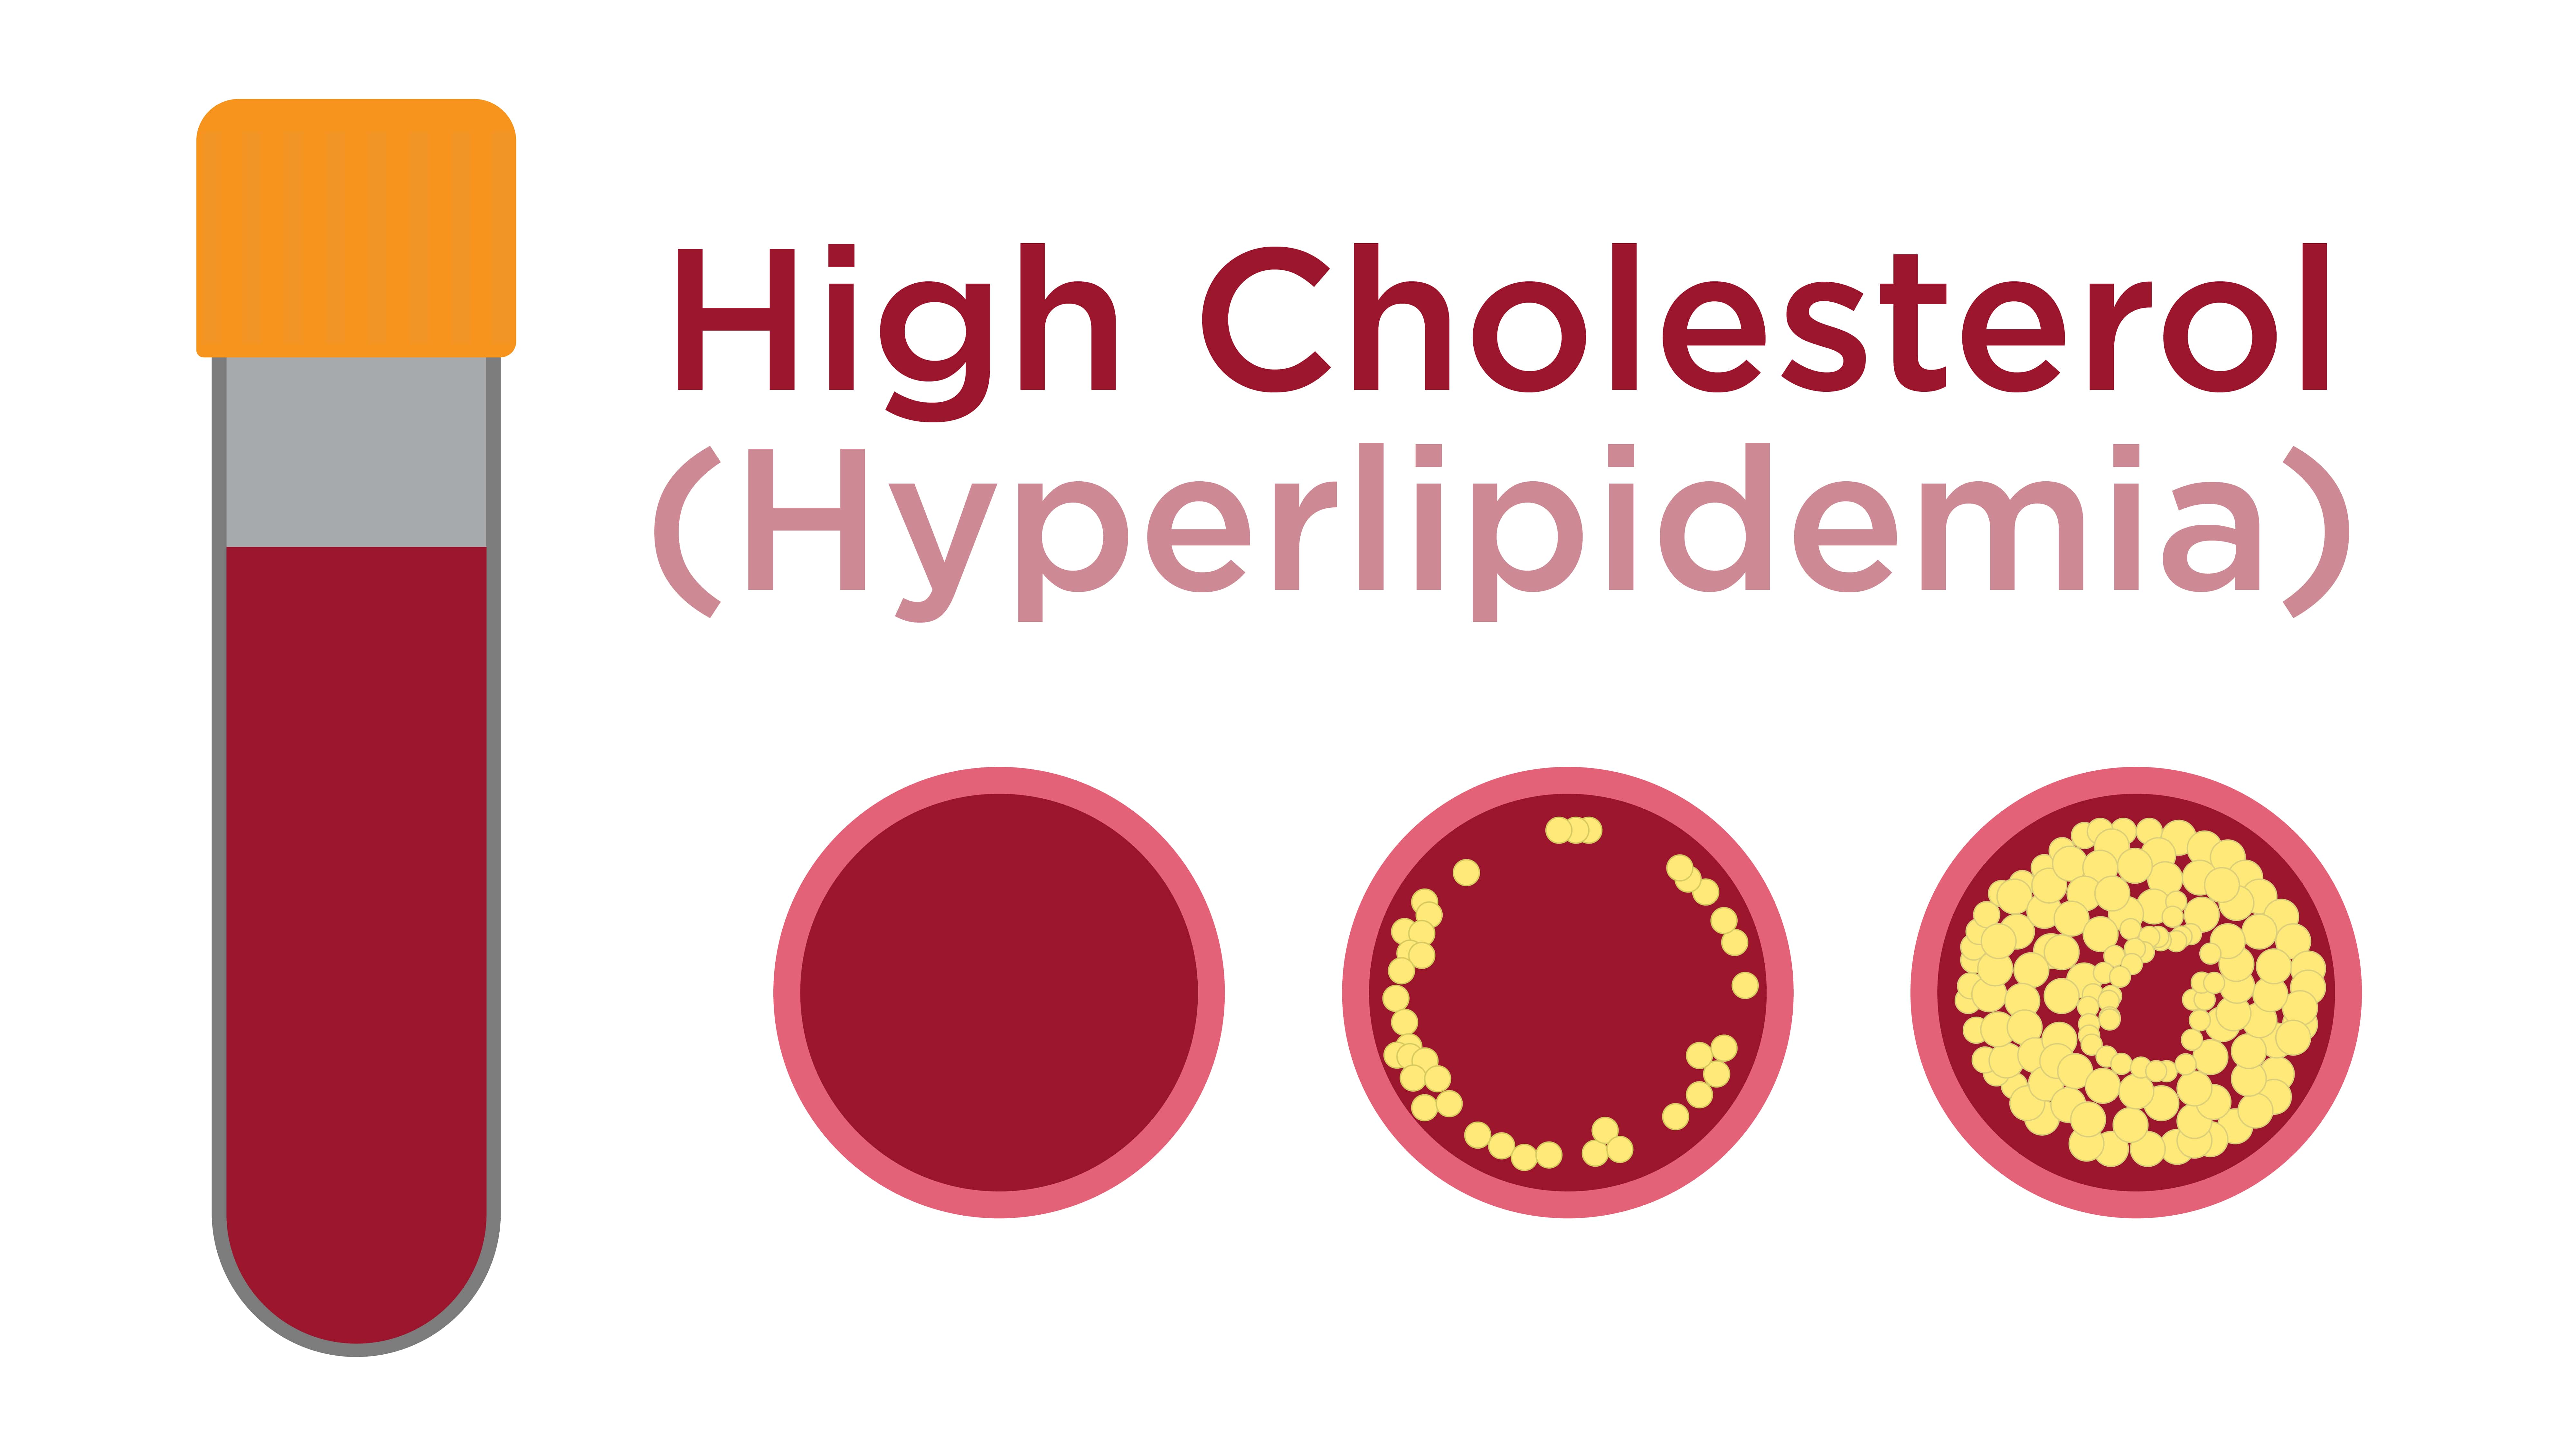 High Cholesterol (Hyperlipidemia): Causes, Effects, and Prevention